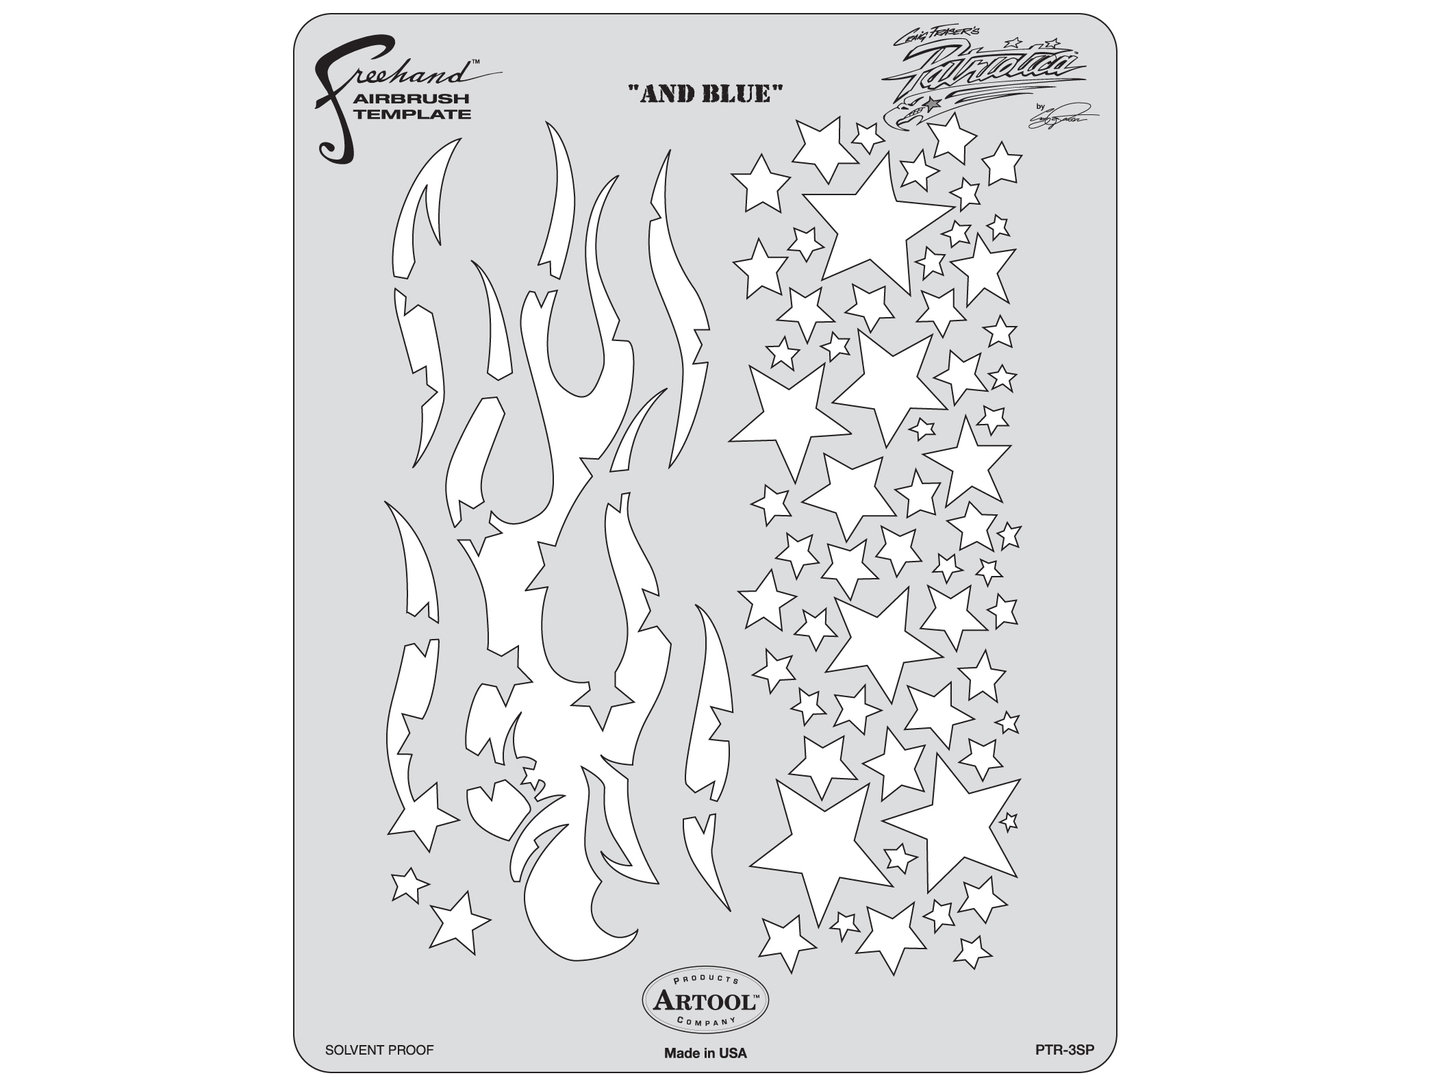 ARTOOL PTR 3 SP Patriotica And Blue Freehand Airbrush Template by Craig Fraser